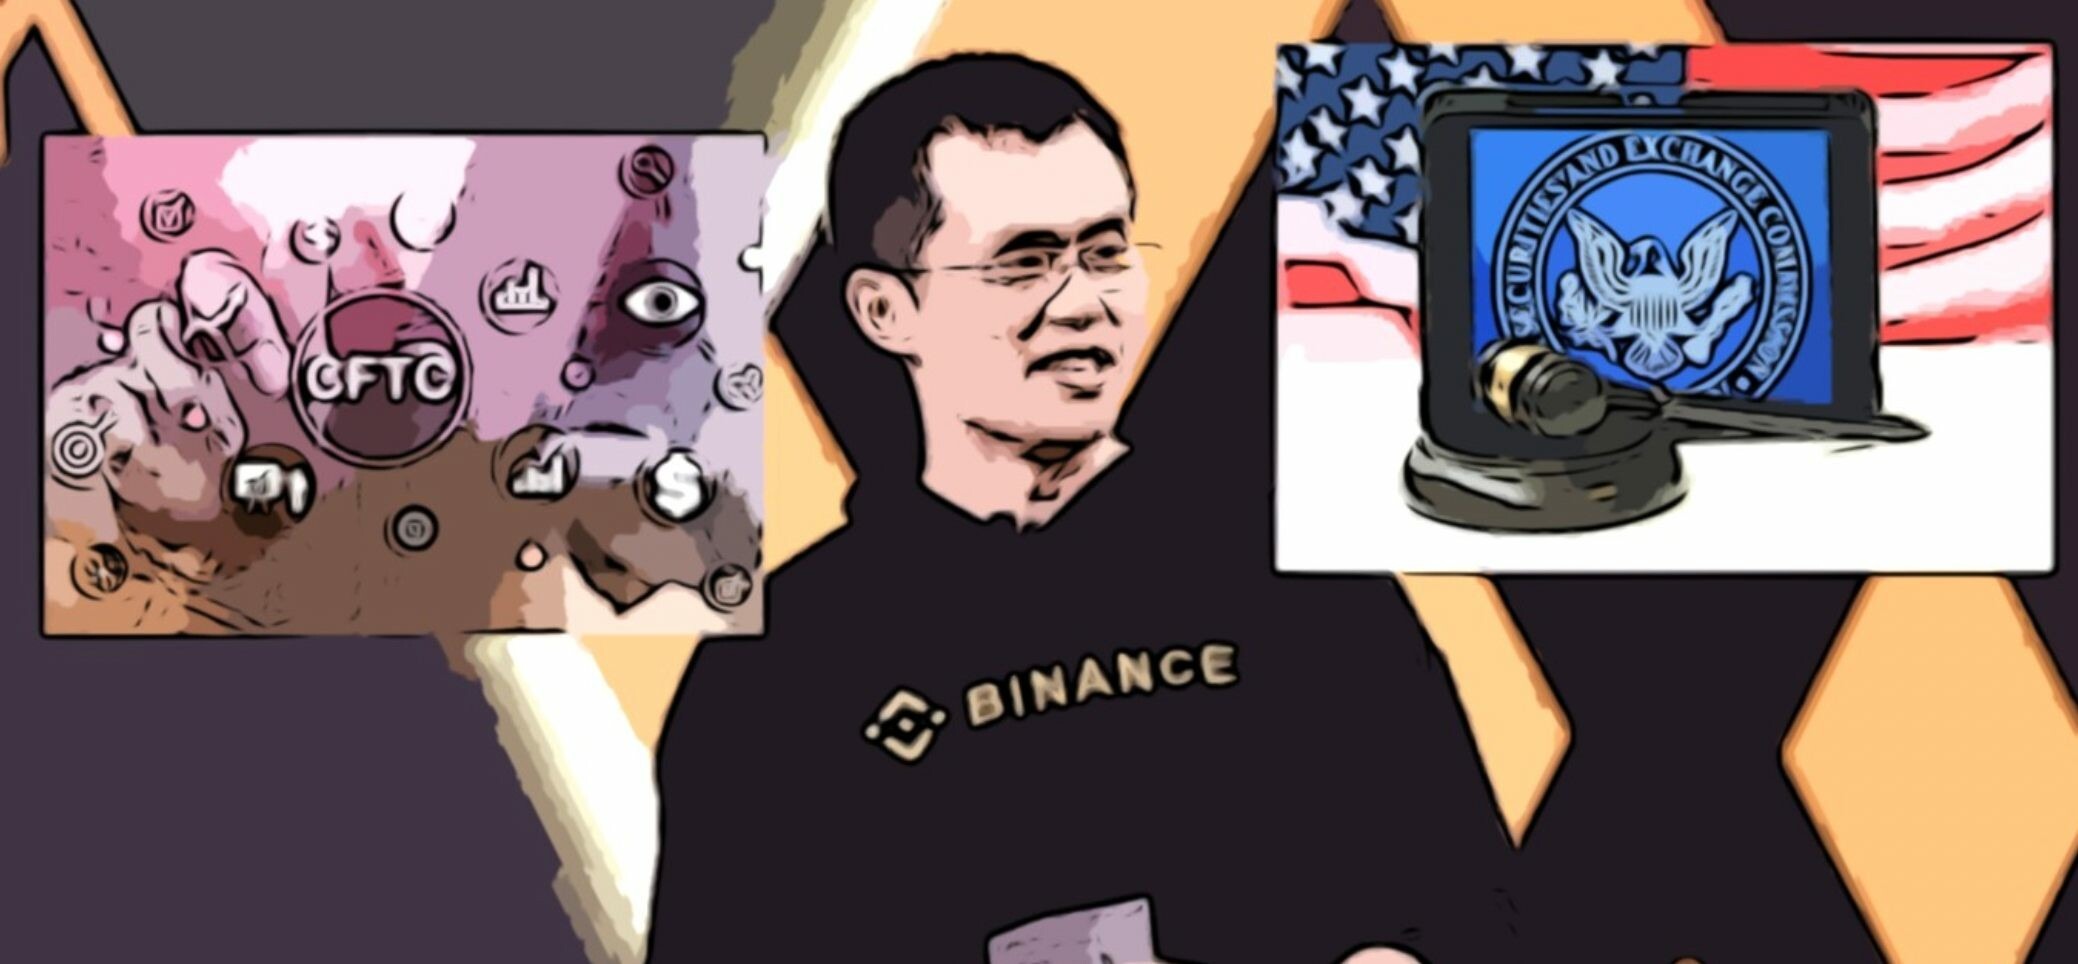 CRYPTONEWSBYTES.COM CZ-CFTC-Binance-1 CFTC Files Complaint Against Binance and Executives - What we know so far  